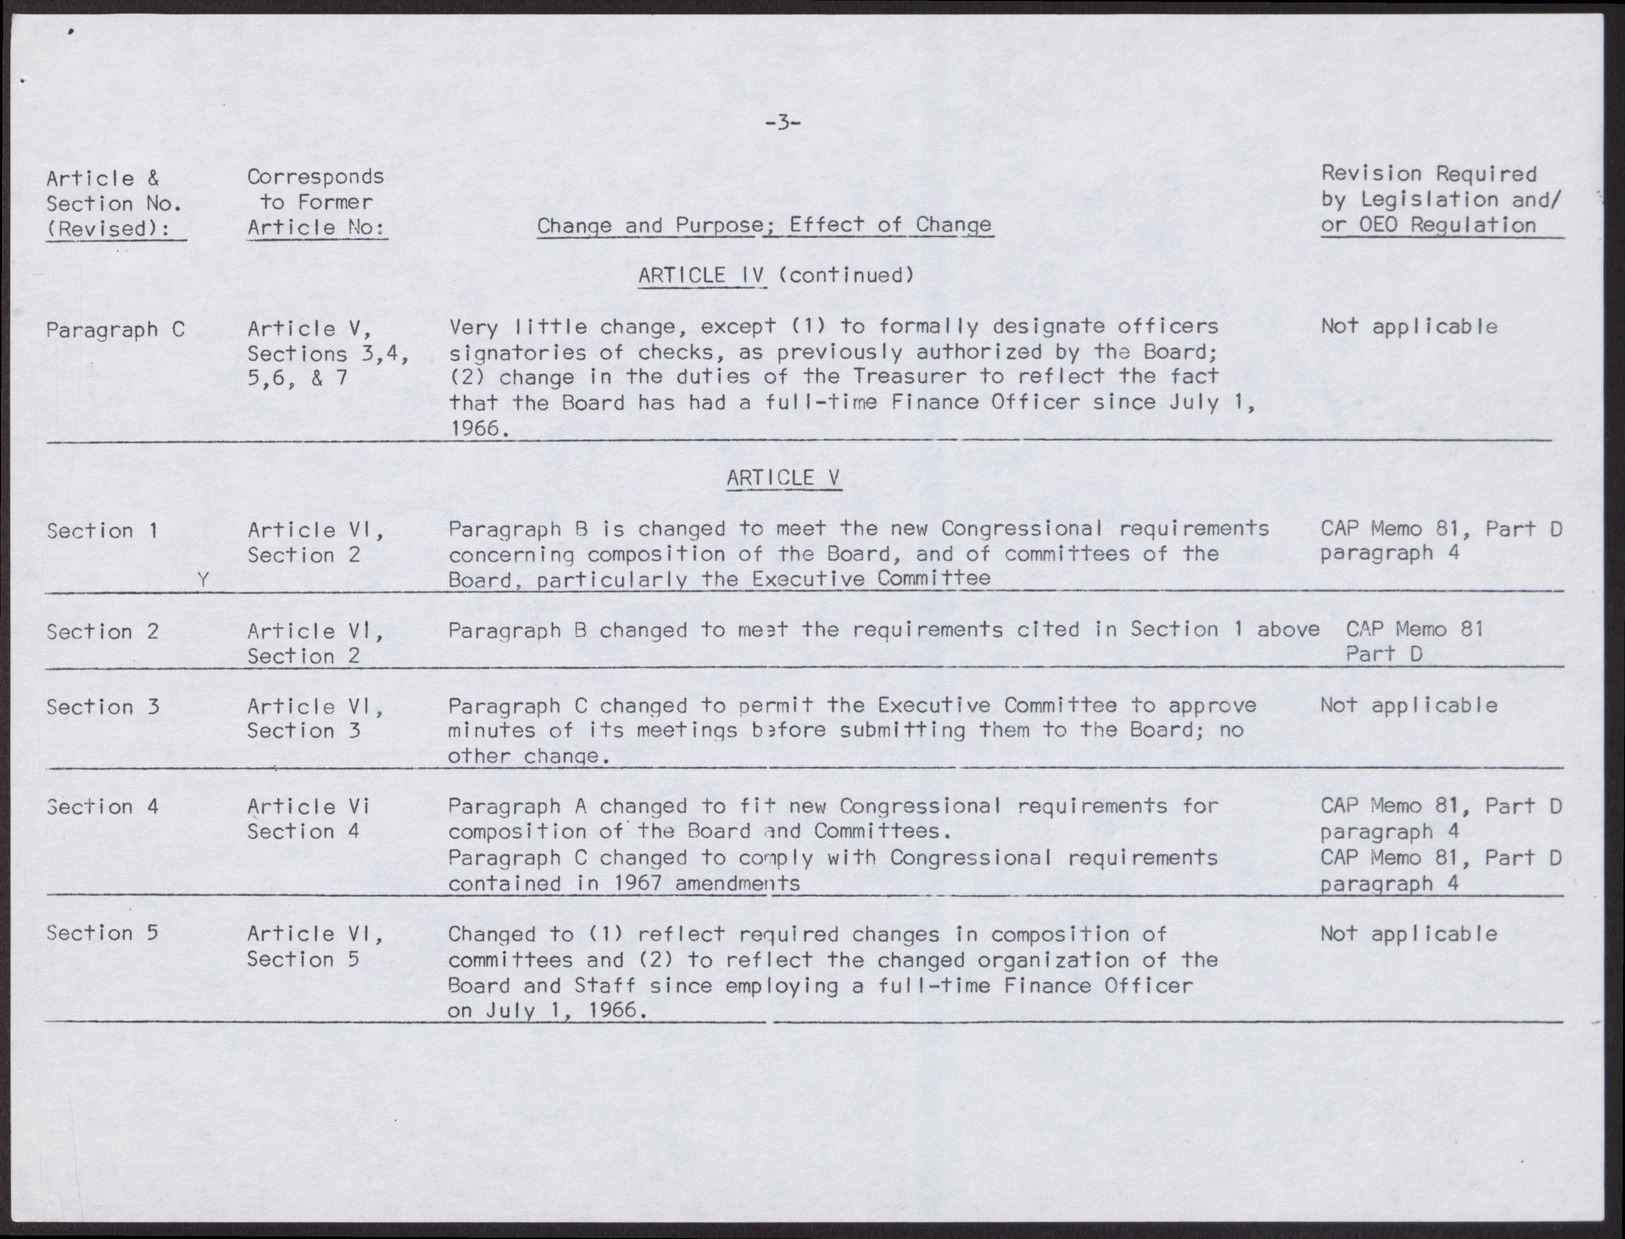 Summary of Proposed Changes to By-Laws (5 pages), March 1968, page 3